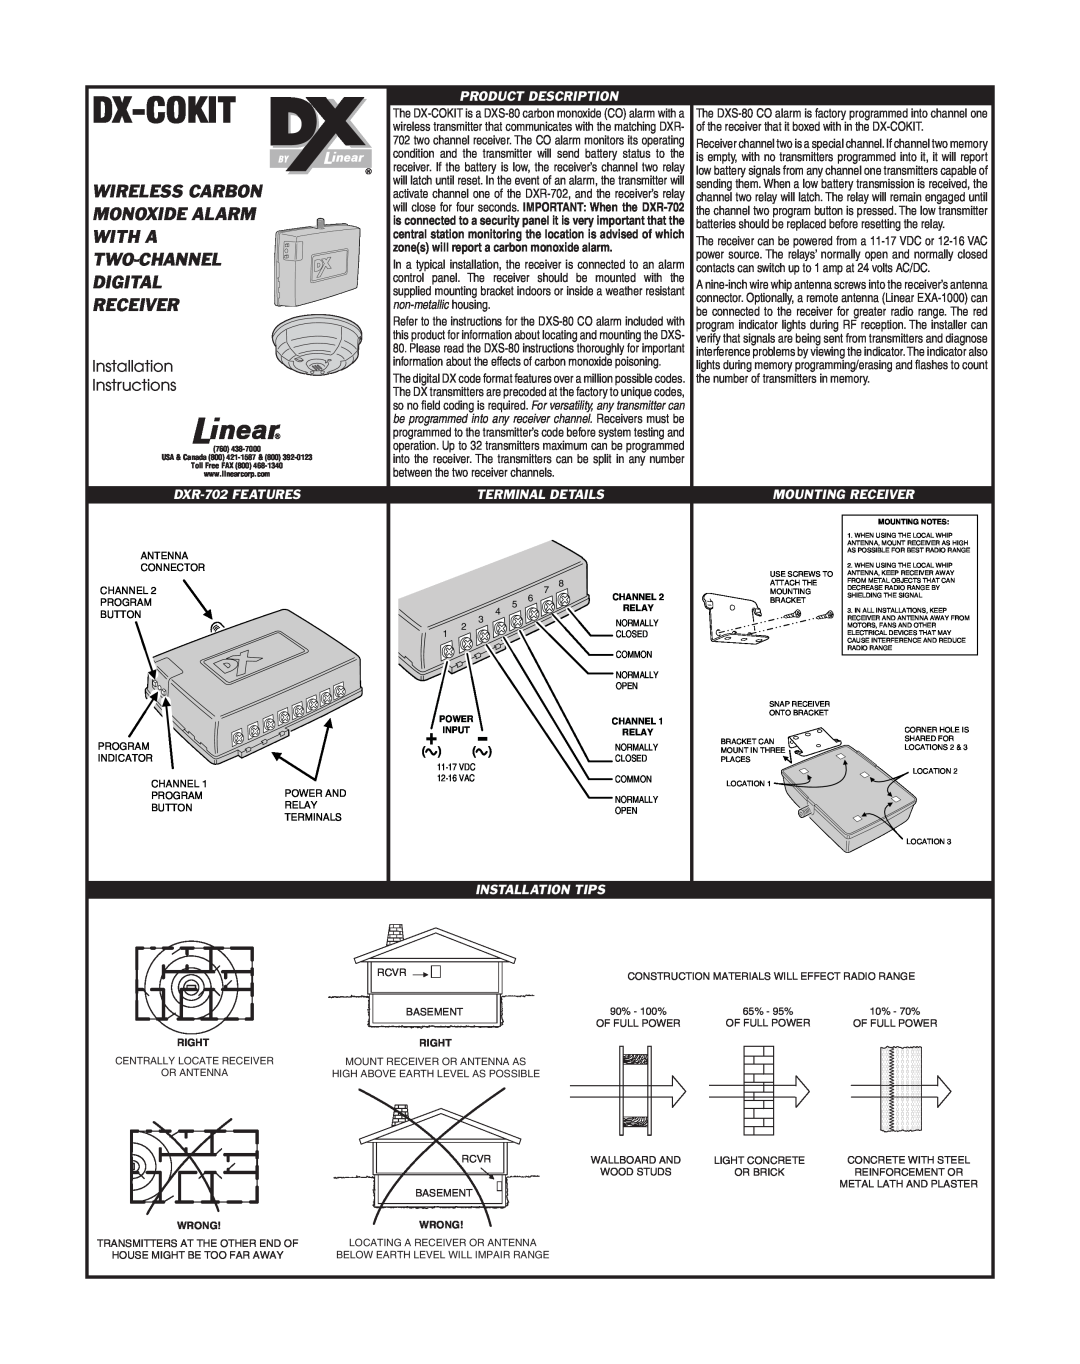 Linear DX-COKIT installation instructions Product Description, Terminal Details, Mounting Receiver, Installation Tips 